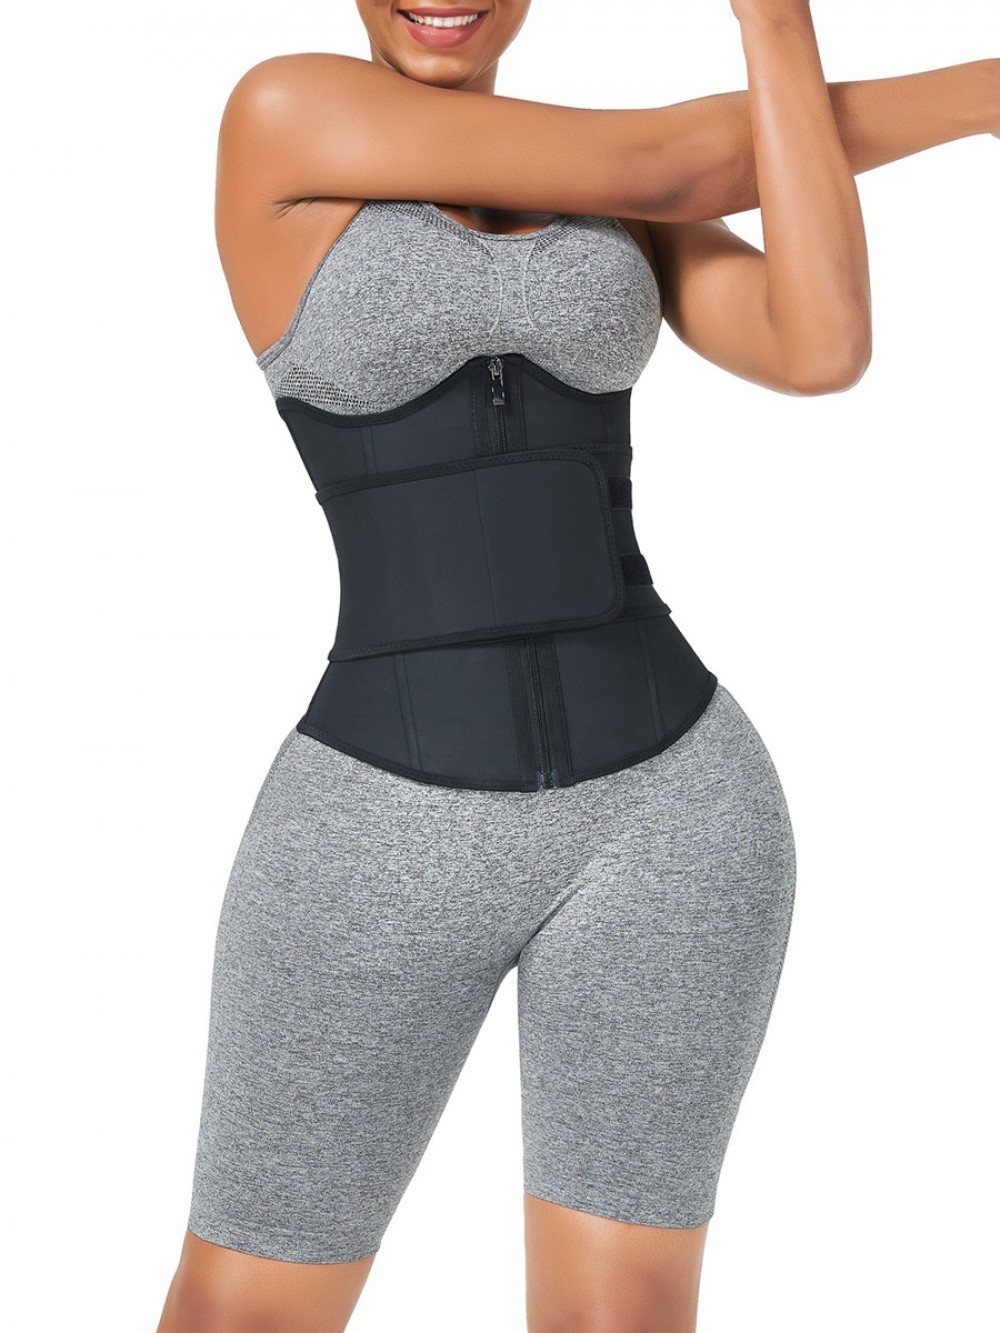 Black Bust Support Latex Waist Trainer With Belt Slimming Tummy